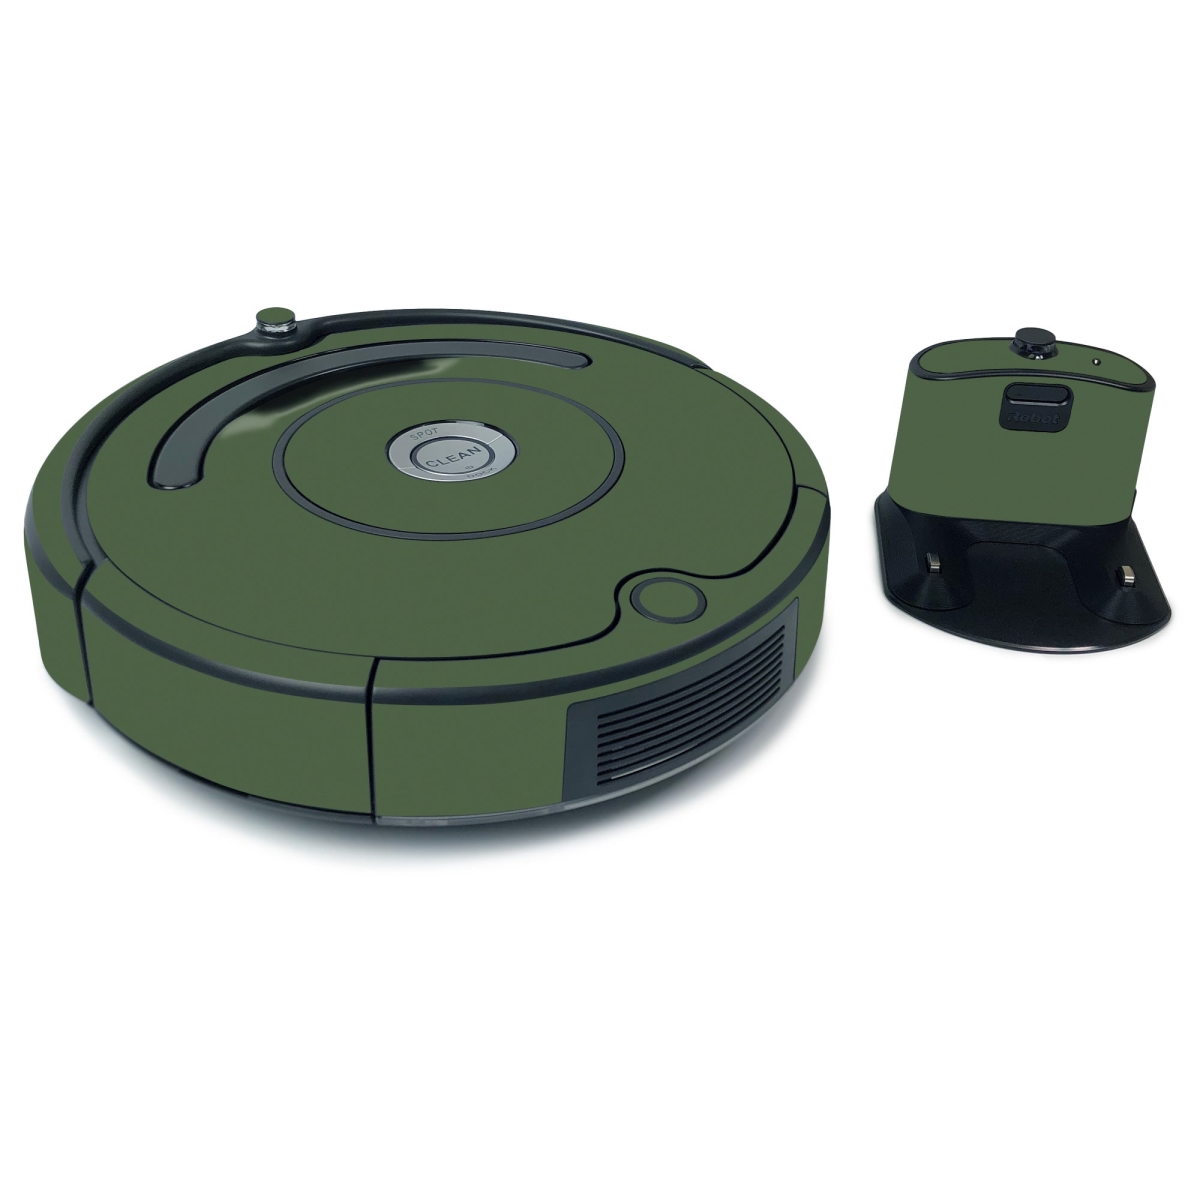 Picture of MightySkins IRRO675-Solid Olive Skin for iRobot Roomba 675 Max Coverage - Solid Olive